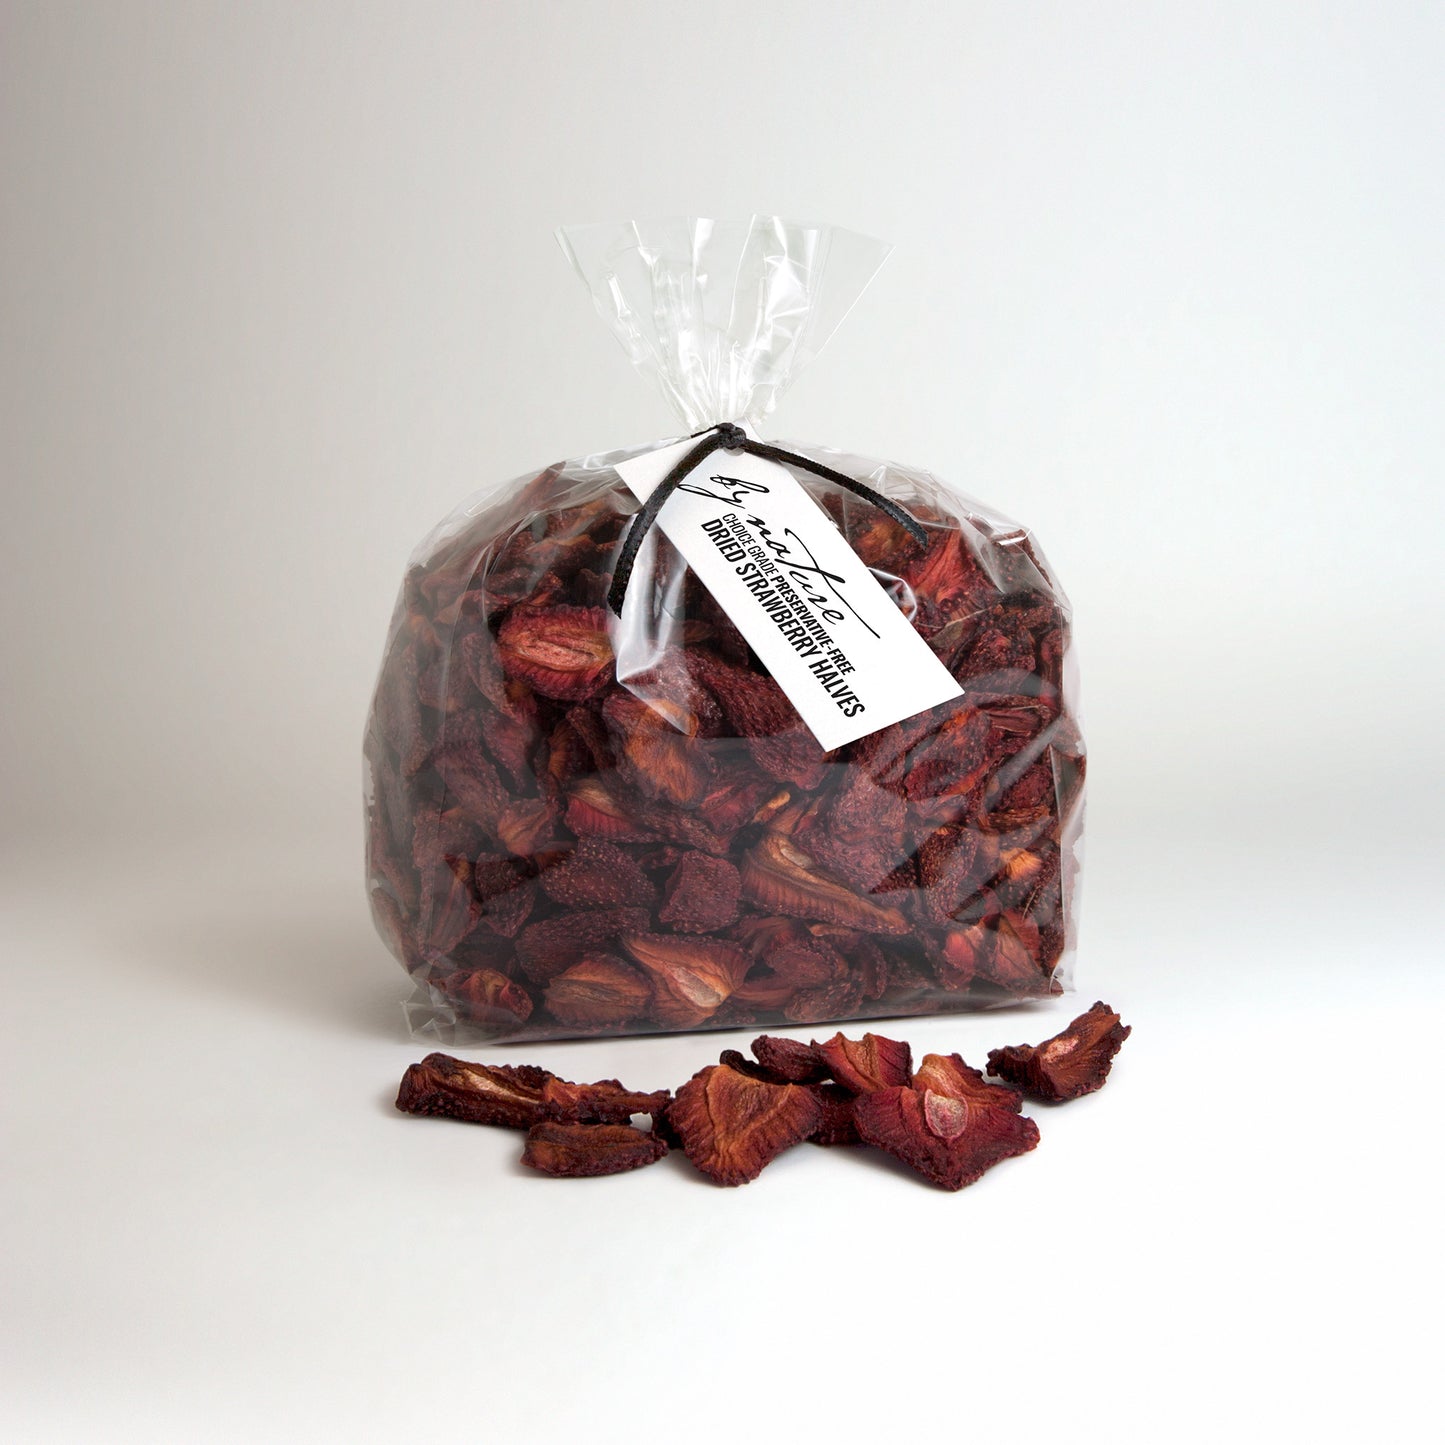 BY NATURE Dried Strawberry Halves, 500g - preservative-free.